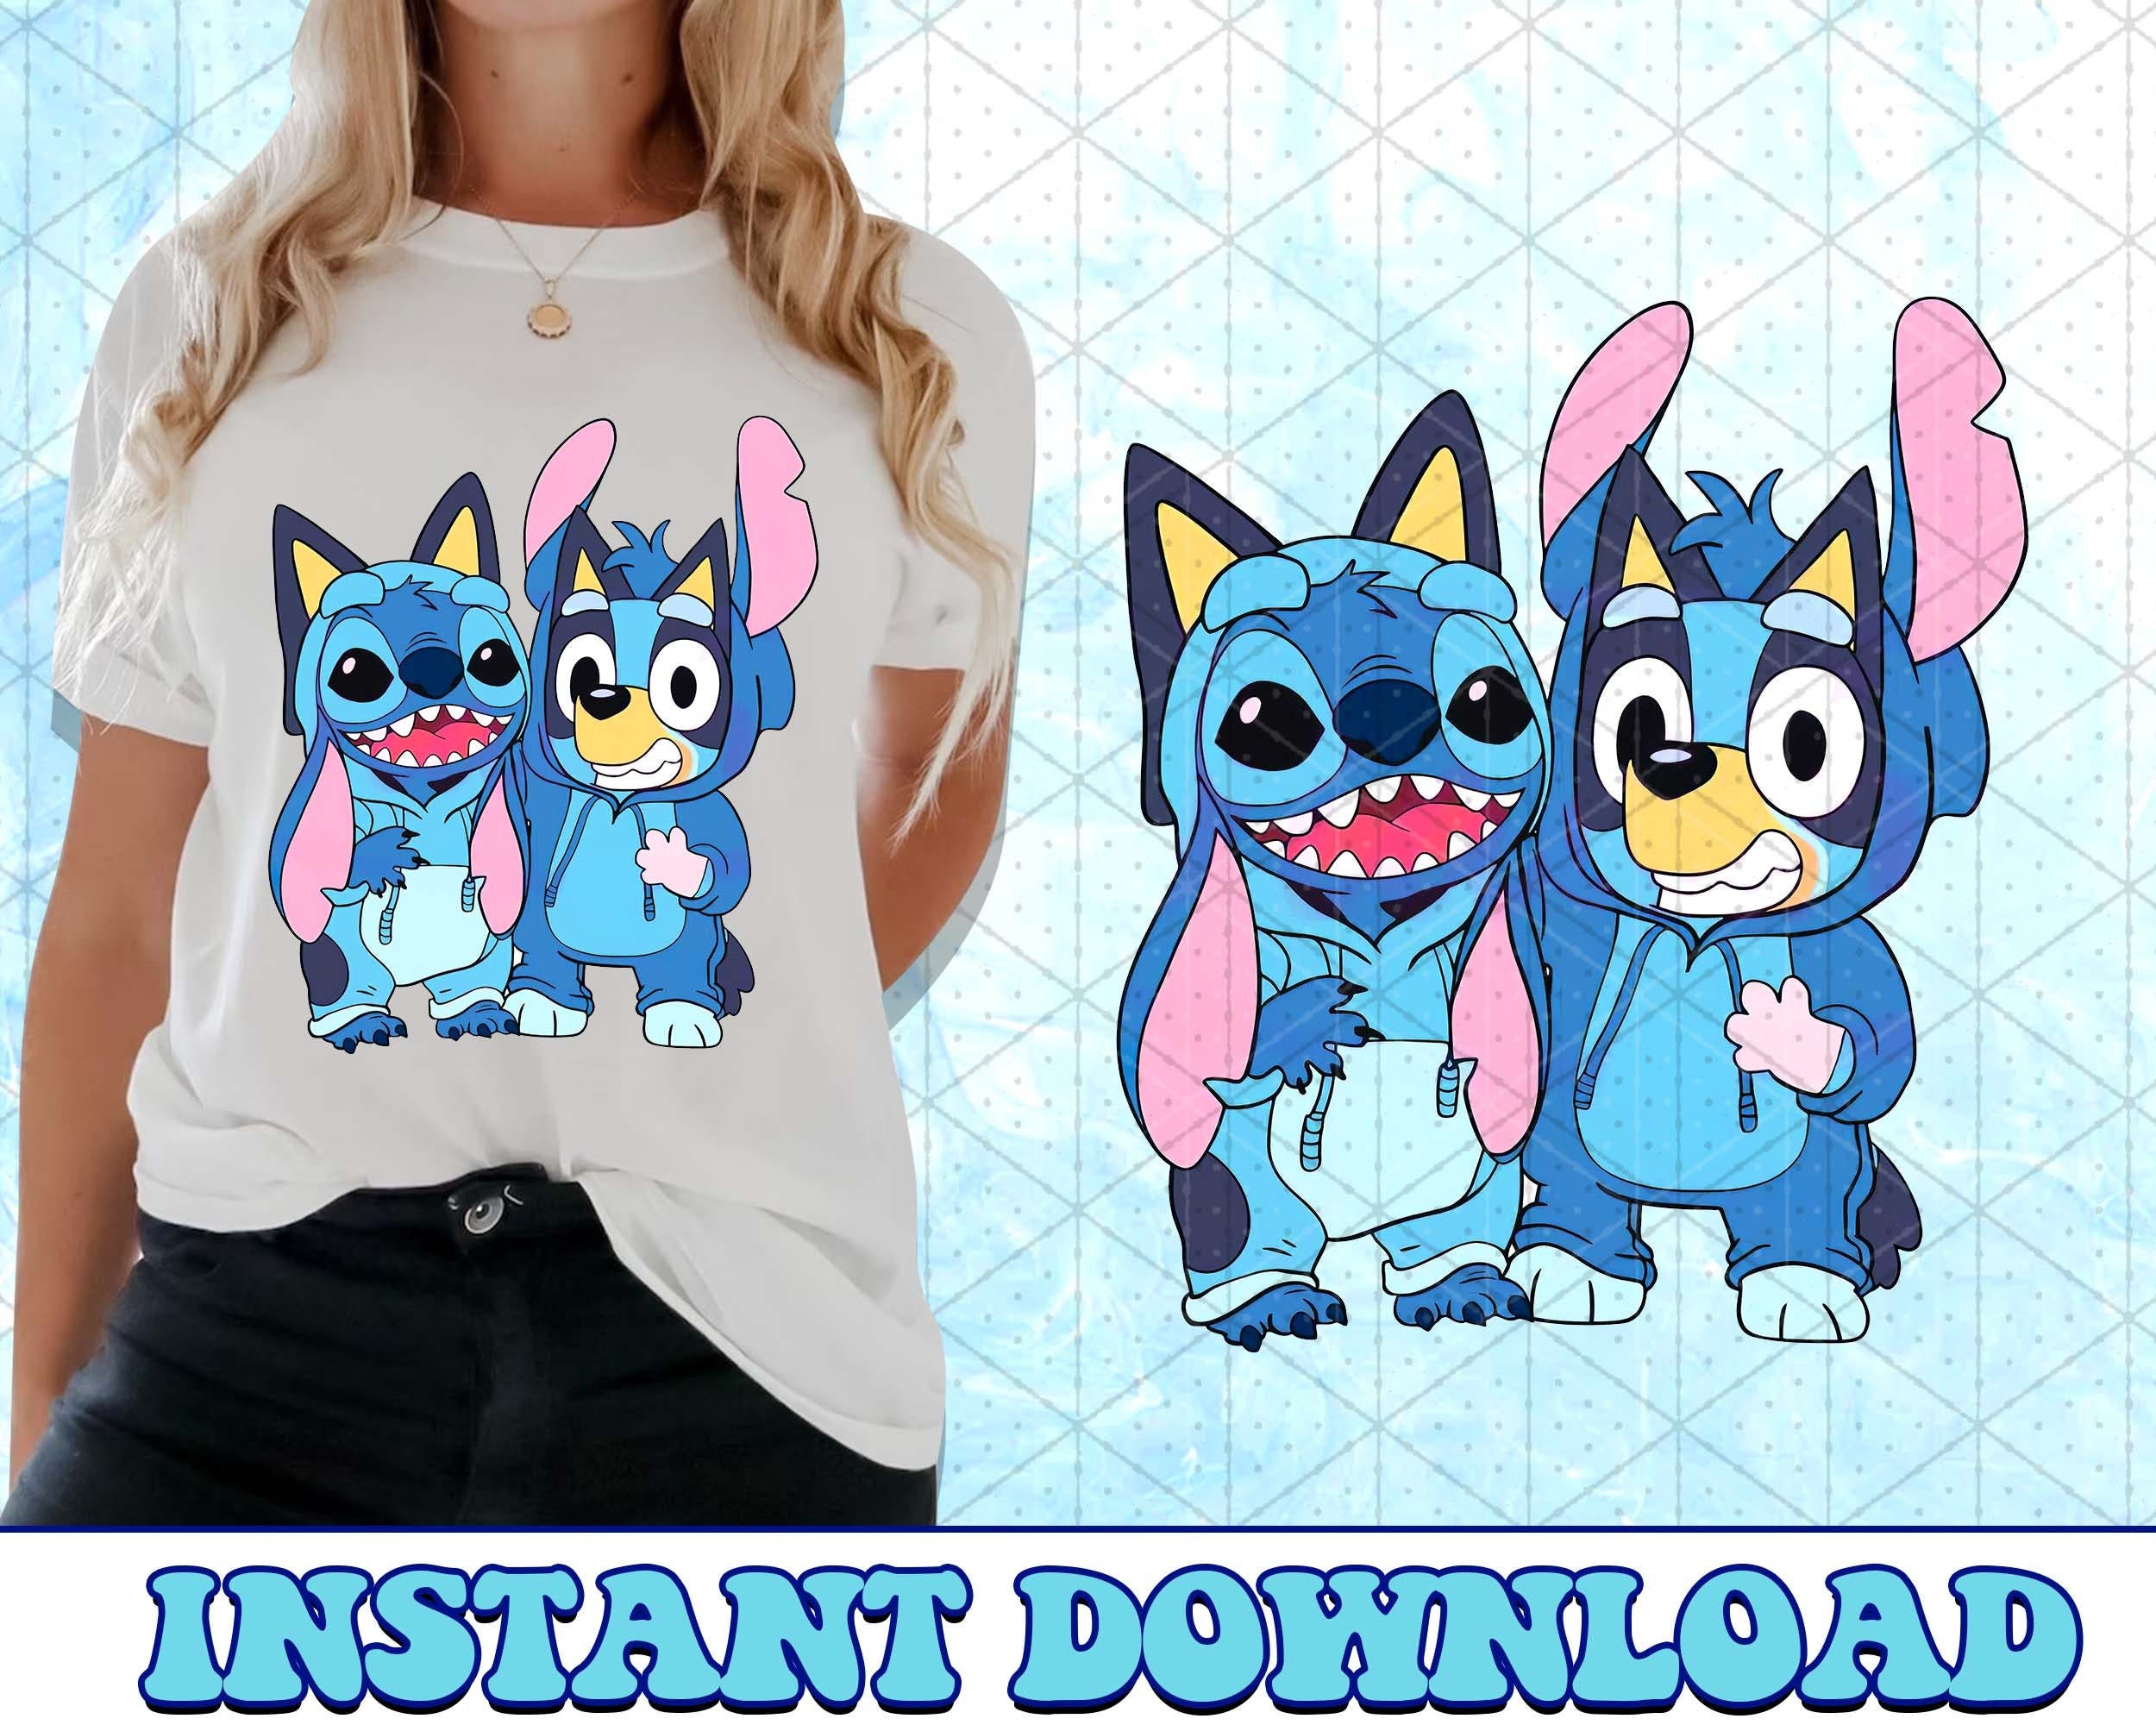 Stitch Bluey PNG, Bluey Family PNG, Bluey Png, Bluey Bingo Png, Bluey Mom Png, Bluey Dad Png, Bluey Friends Png, Bluey PNG